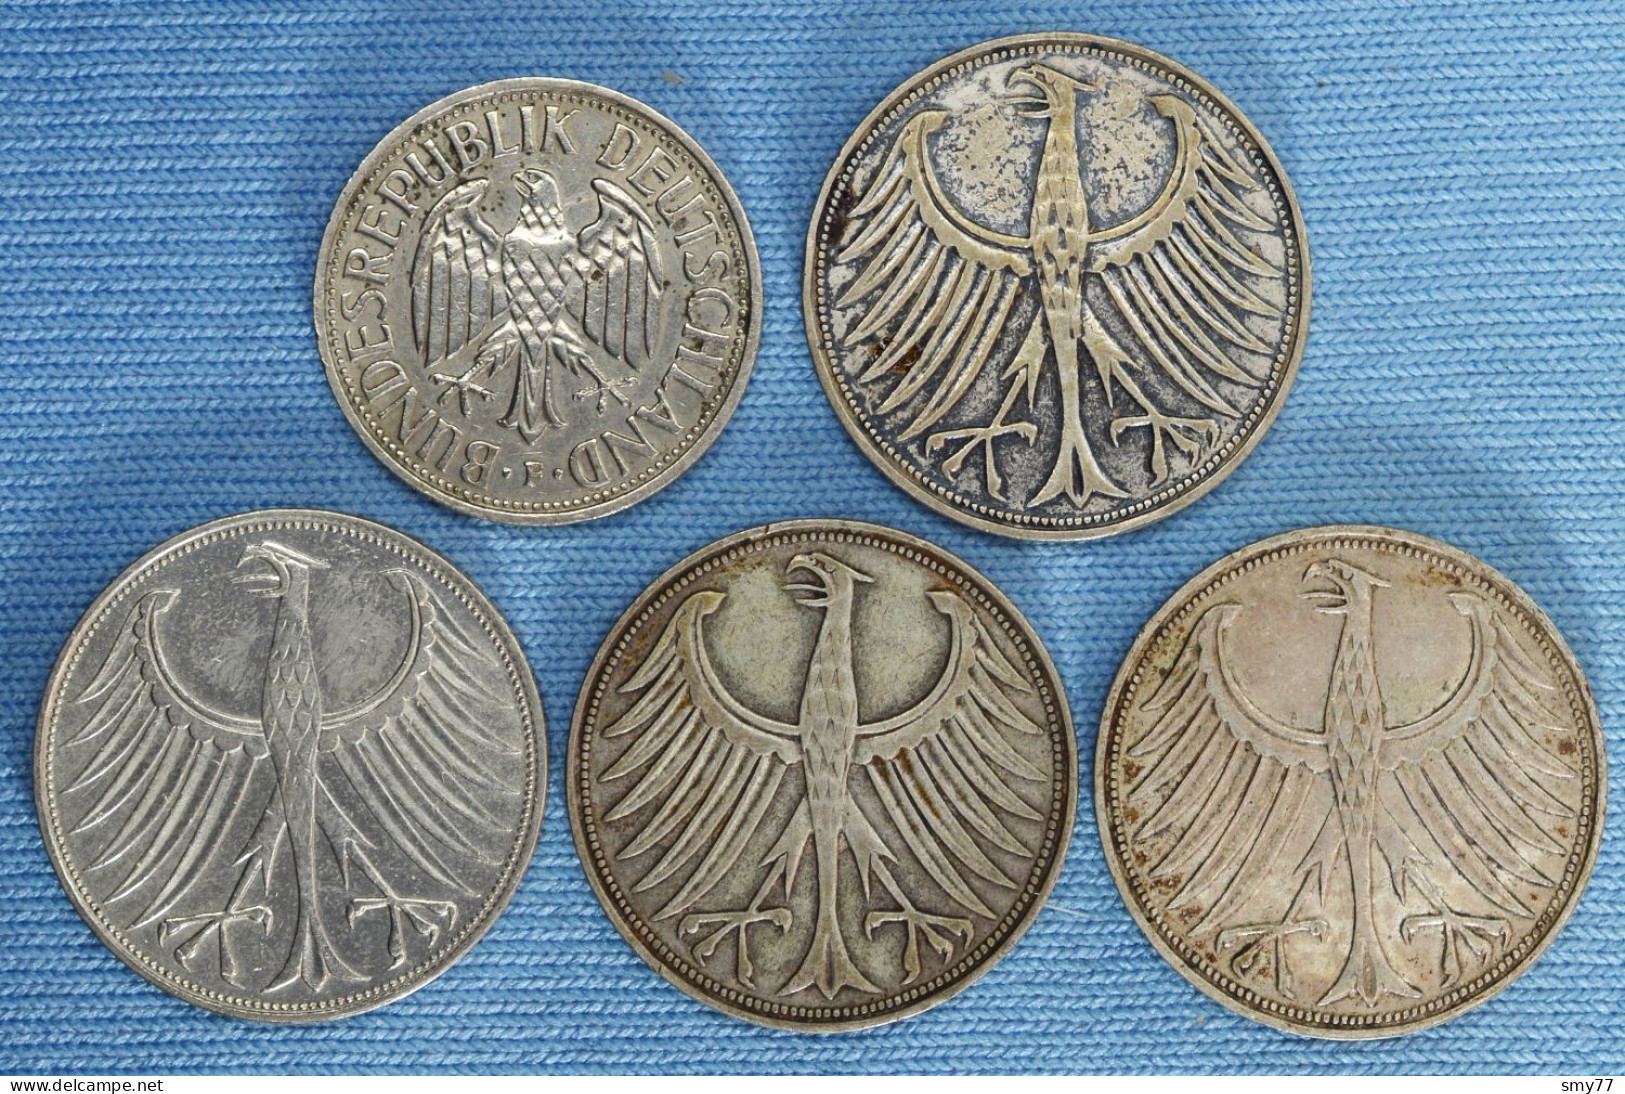 Allemagne / Germany  • 5 Mark 1951 D, 1951 F (2x), 1972 D + 2 Mark 1951 F  [24-105] - Collezioni